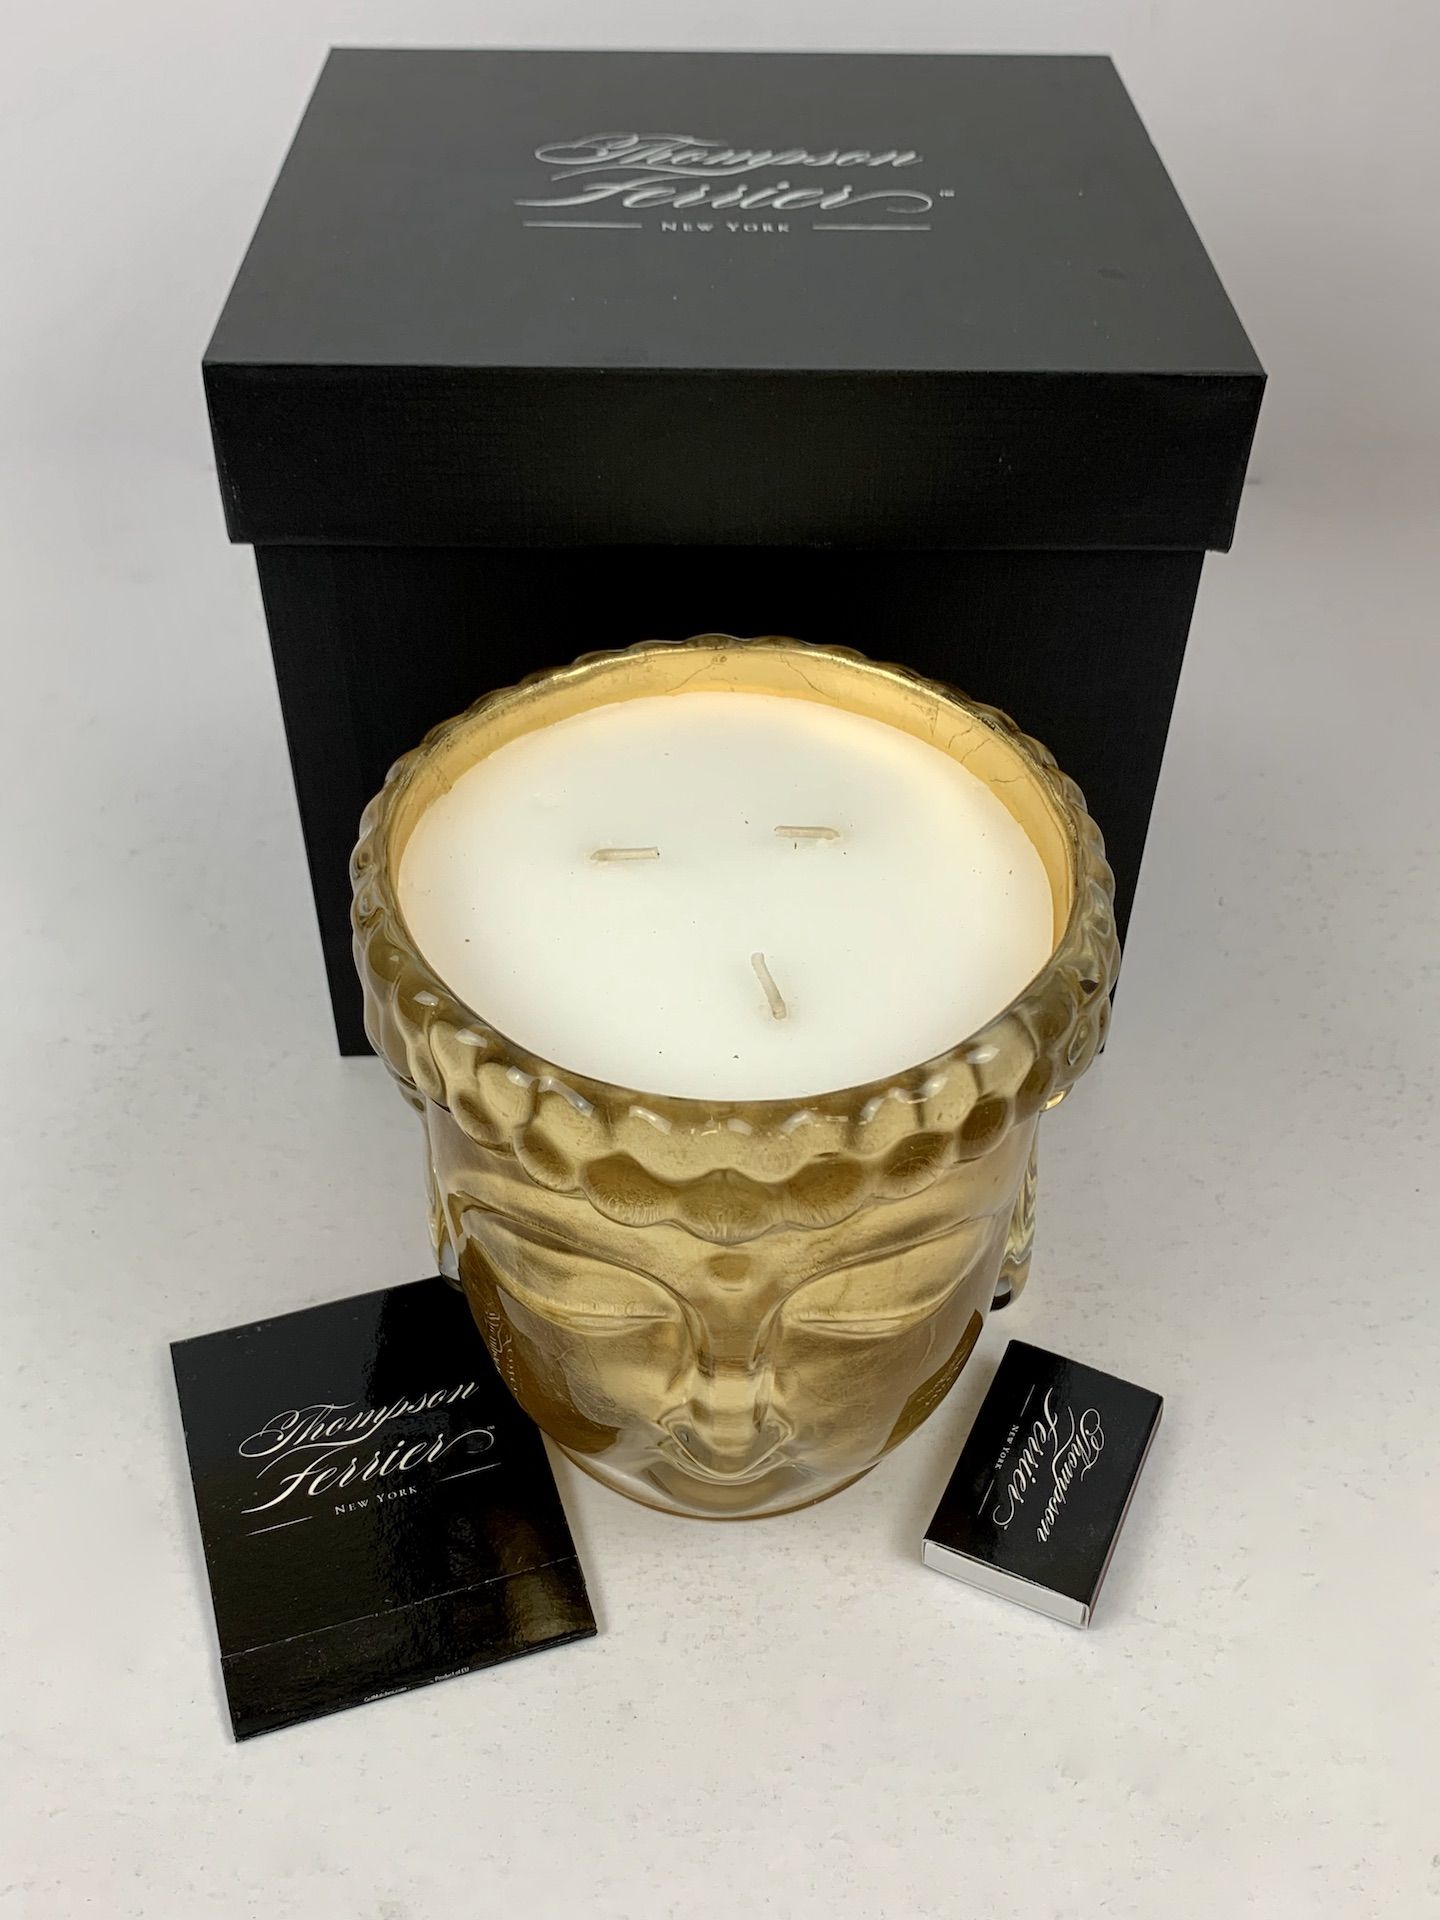 Croesus Premium 3 Wick Soy Scented Buddha Candle Lined with 24K Gold